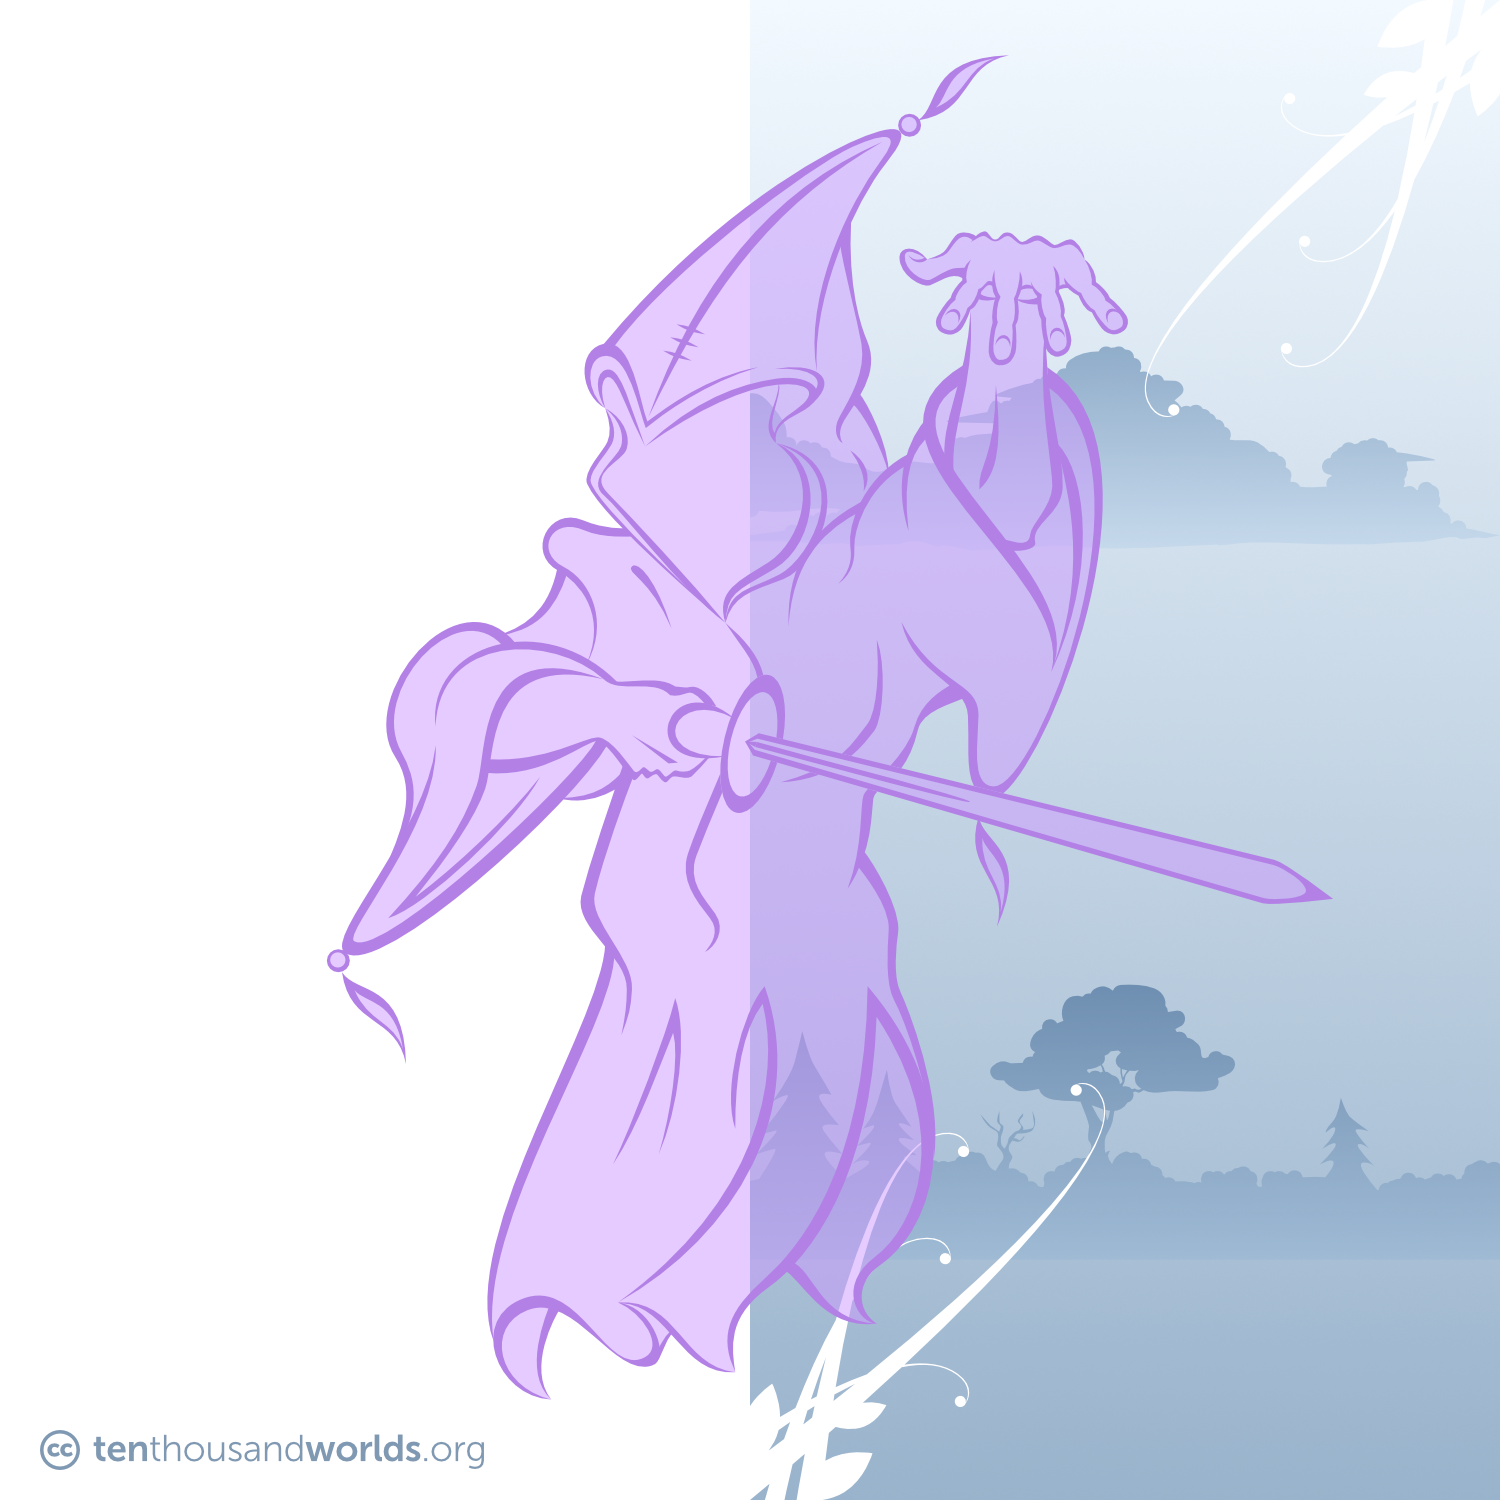 A translucent, violet faceless figure wrapped in voluminous robes with a pointed, tasseled hood; invisible below the robes’ bottom edge; left hand raised to make an incantation; right hand holding a sword.